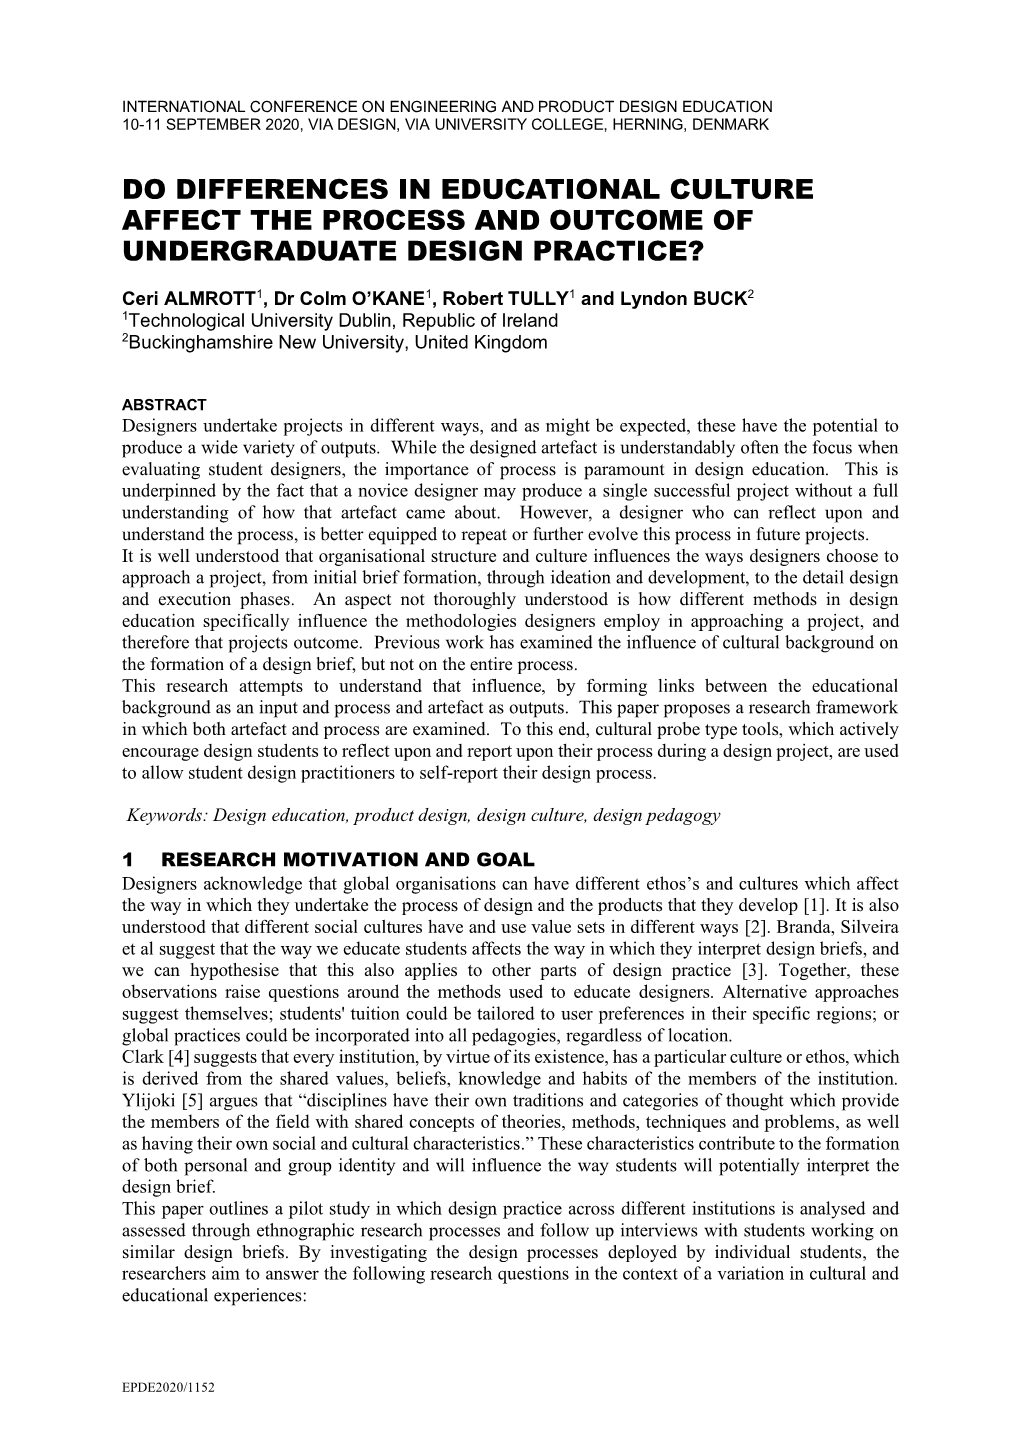 Do Differences in Educational Culture Affect the Process and Outcome of Undergraduate Design Practice?